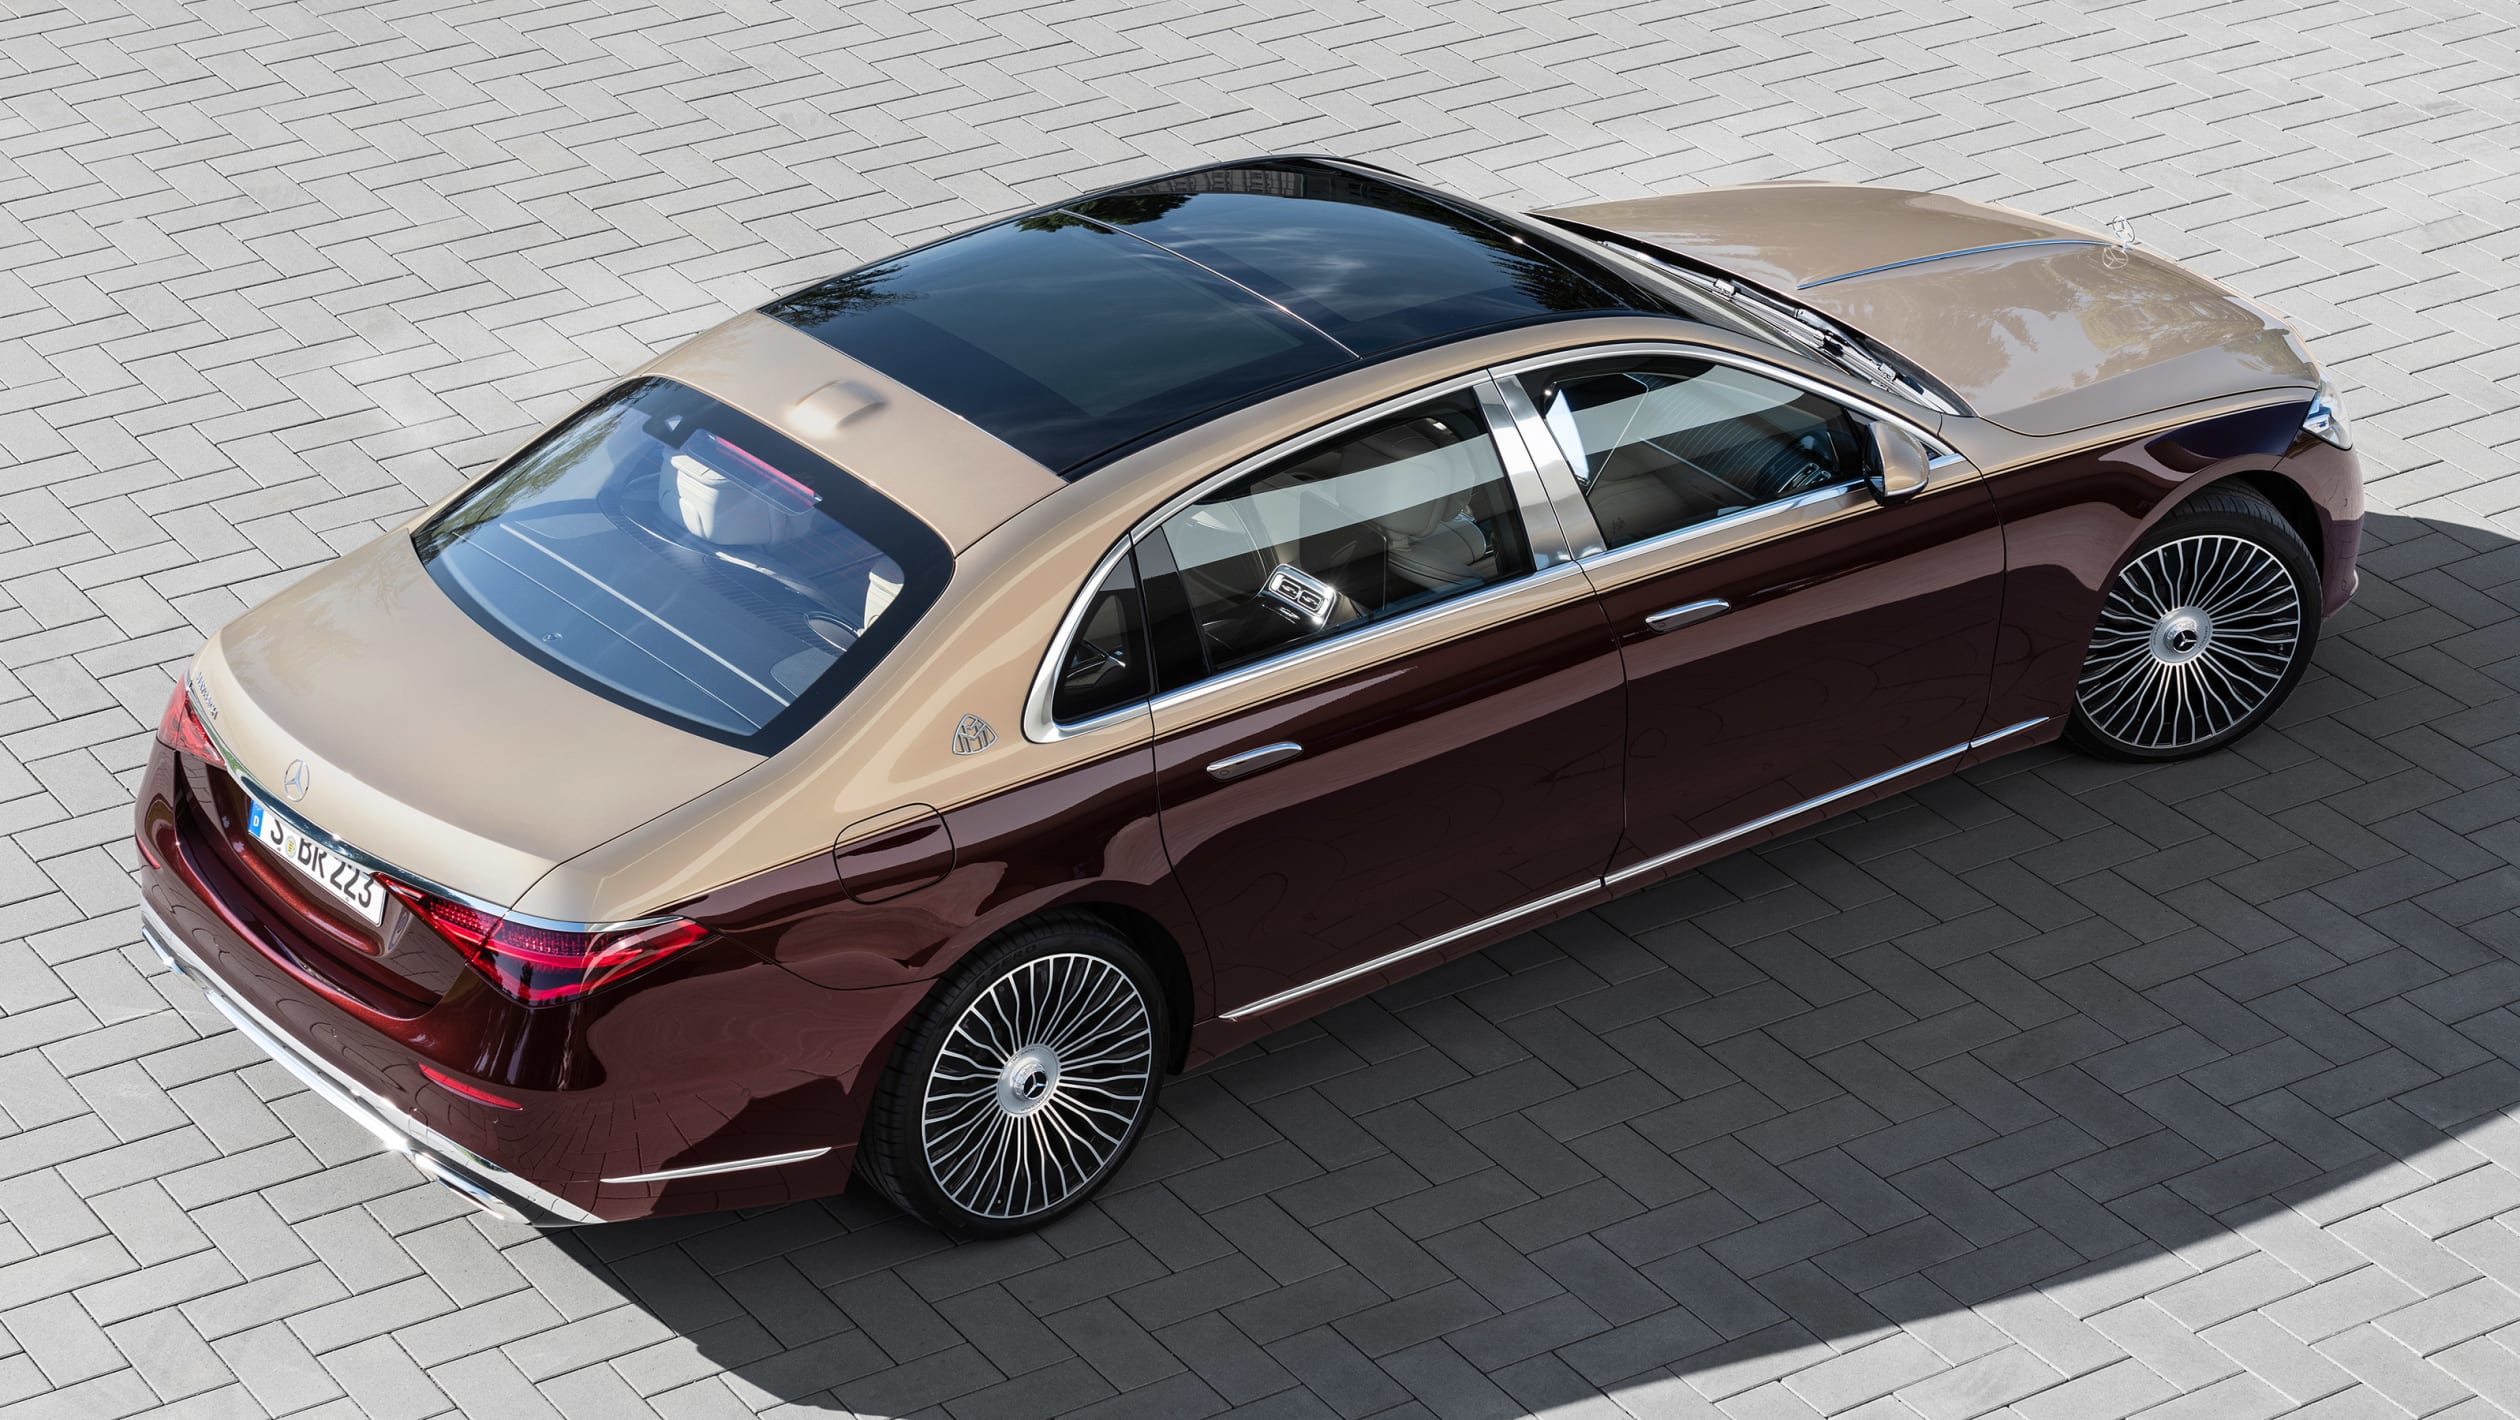 aria-label="New Mercedes Maybach S Class 6"